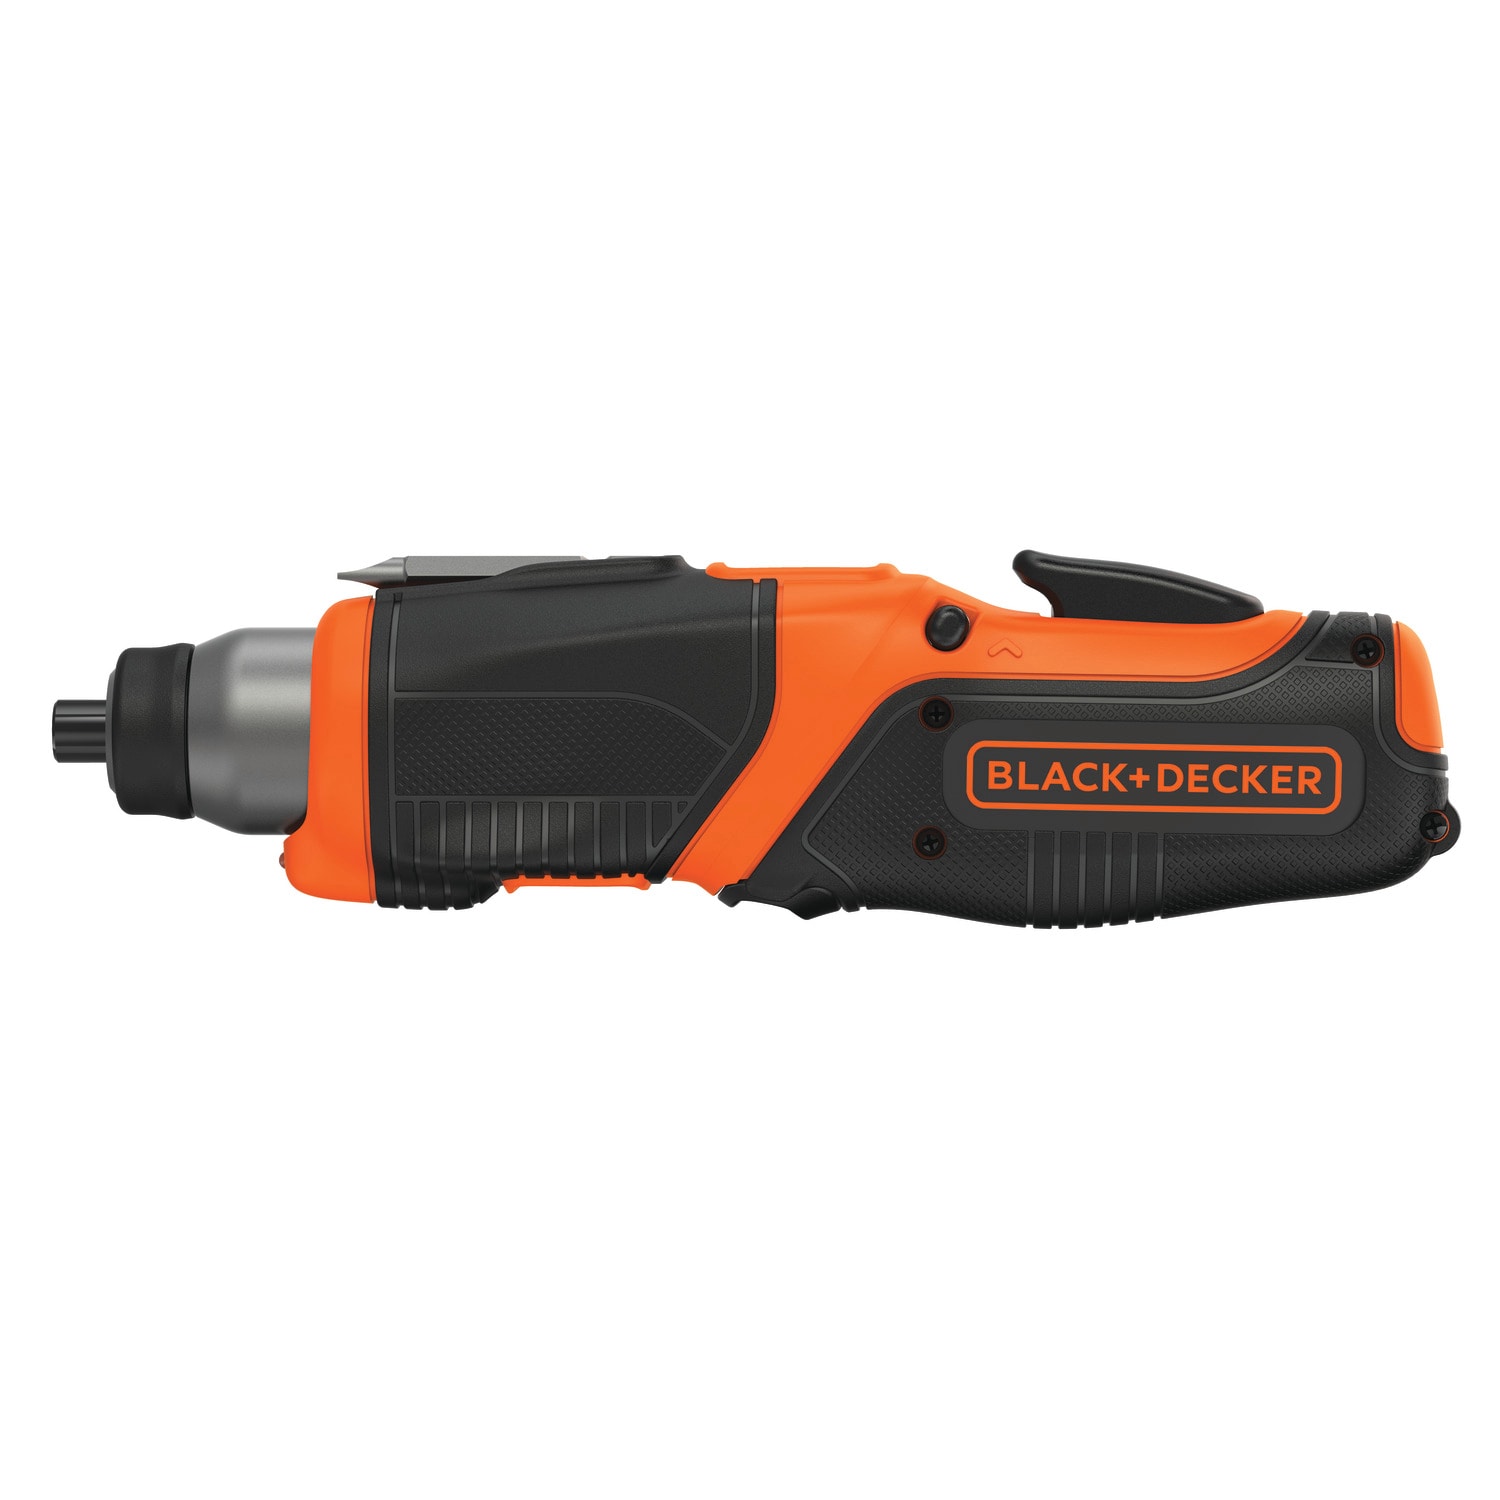 BLACK+DECKER 4V MAX Lithium-Ion Cordless Rechargeable Screwdriver